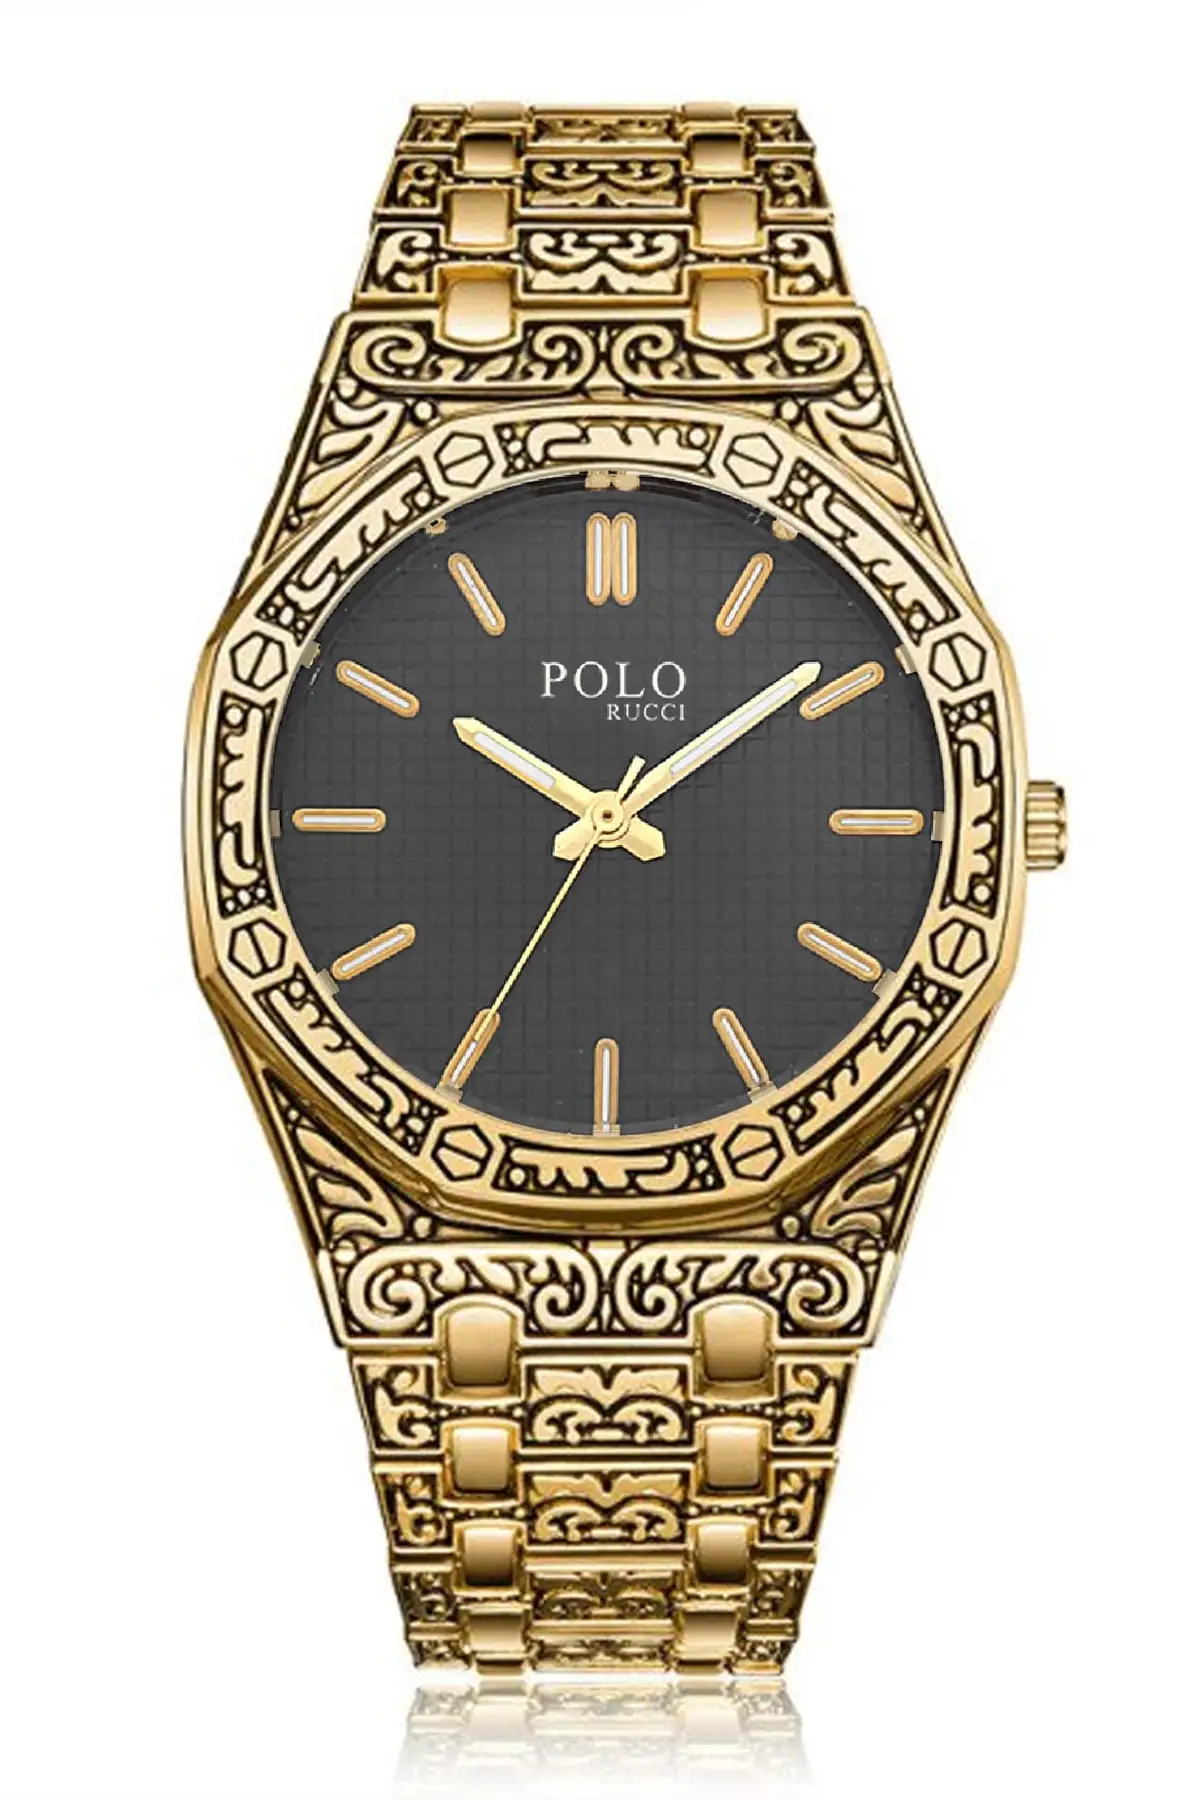 hour watch stylish design mechanical wicker black unisex male woman time accessory classical Sport daily gift couple golden